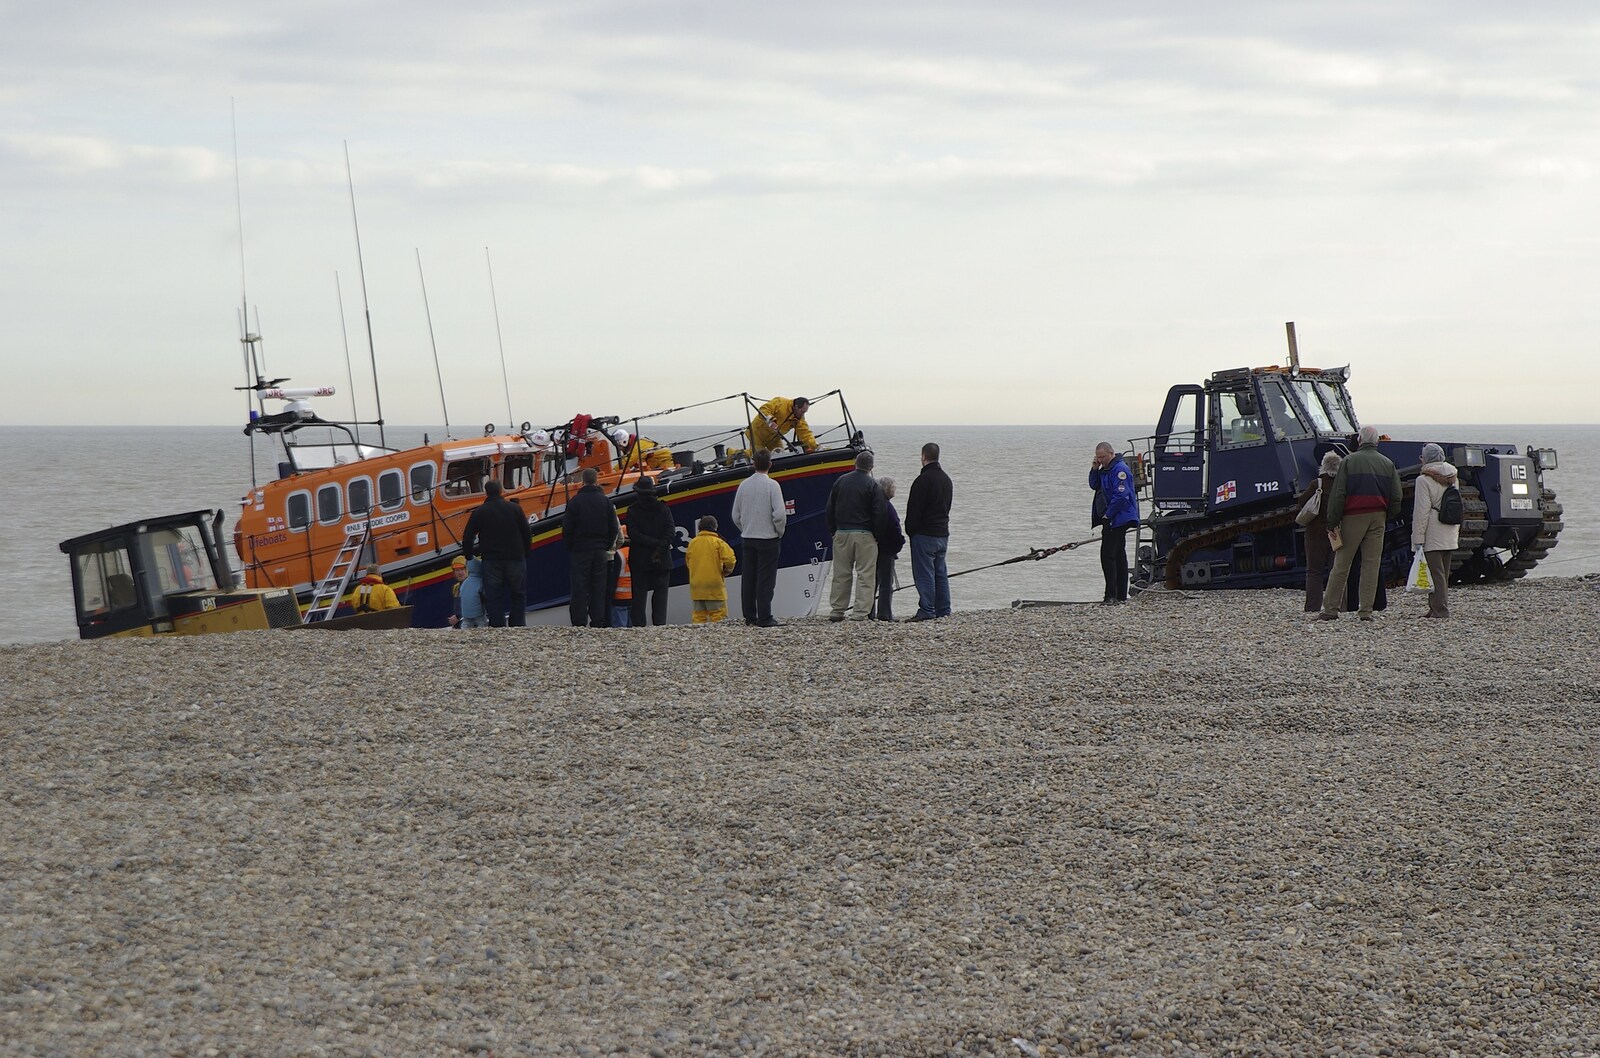 The Aldeburgh lifeboat is hauled over the beach from Aldeburgh Lifeboats with The Old Chap, and a Night at Amandines, Diss, Norfolk - 1st March 2009